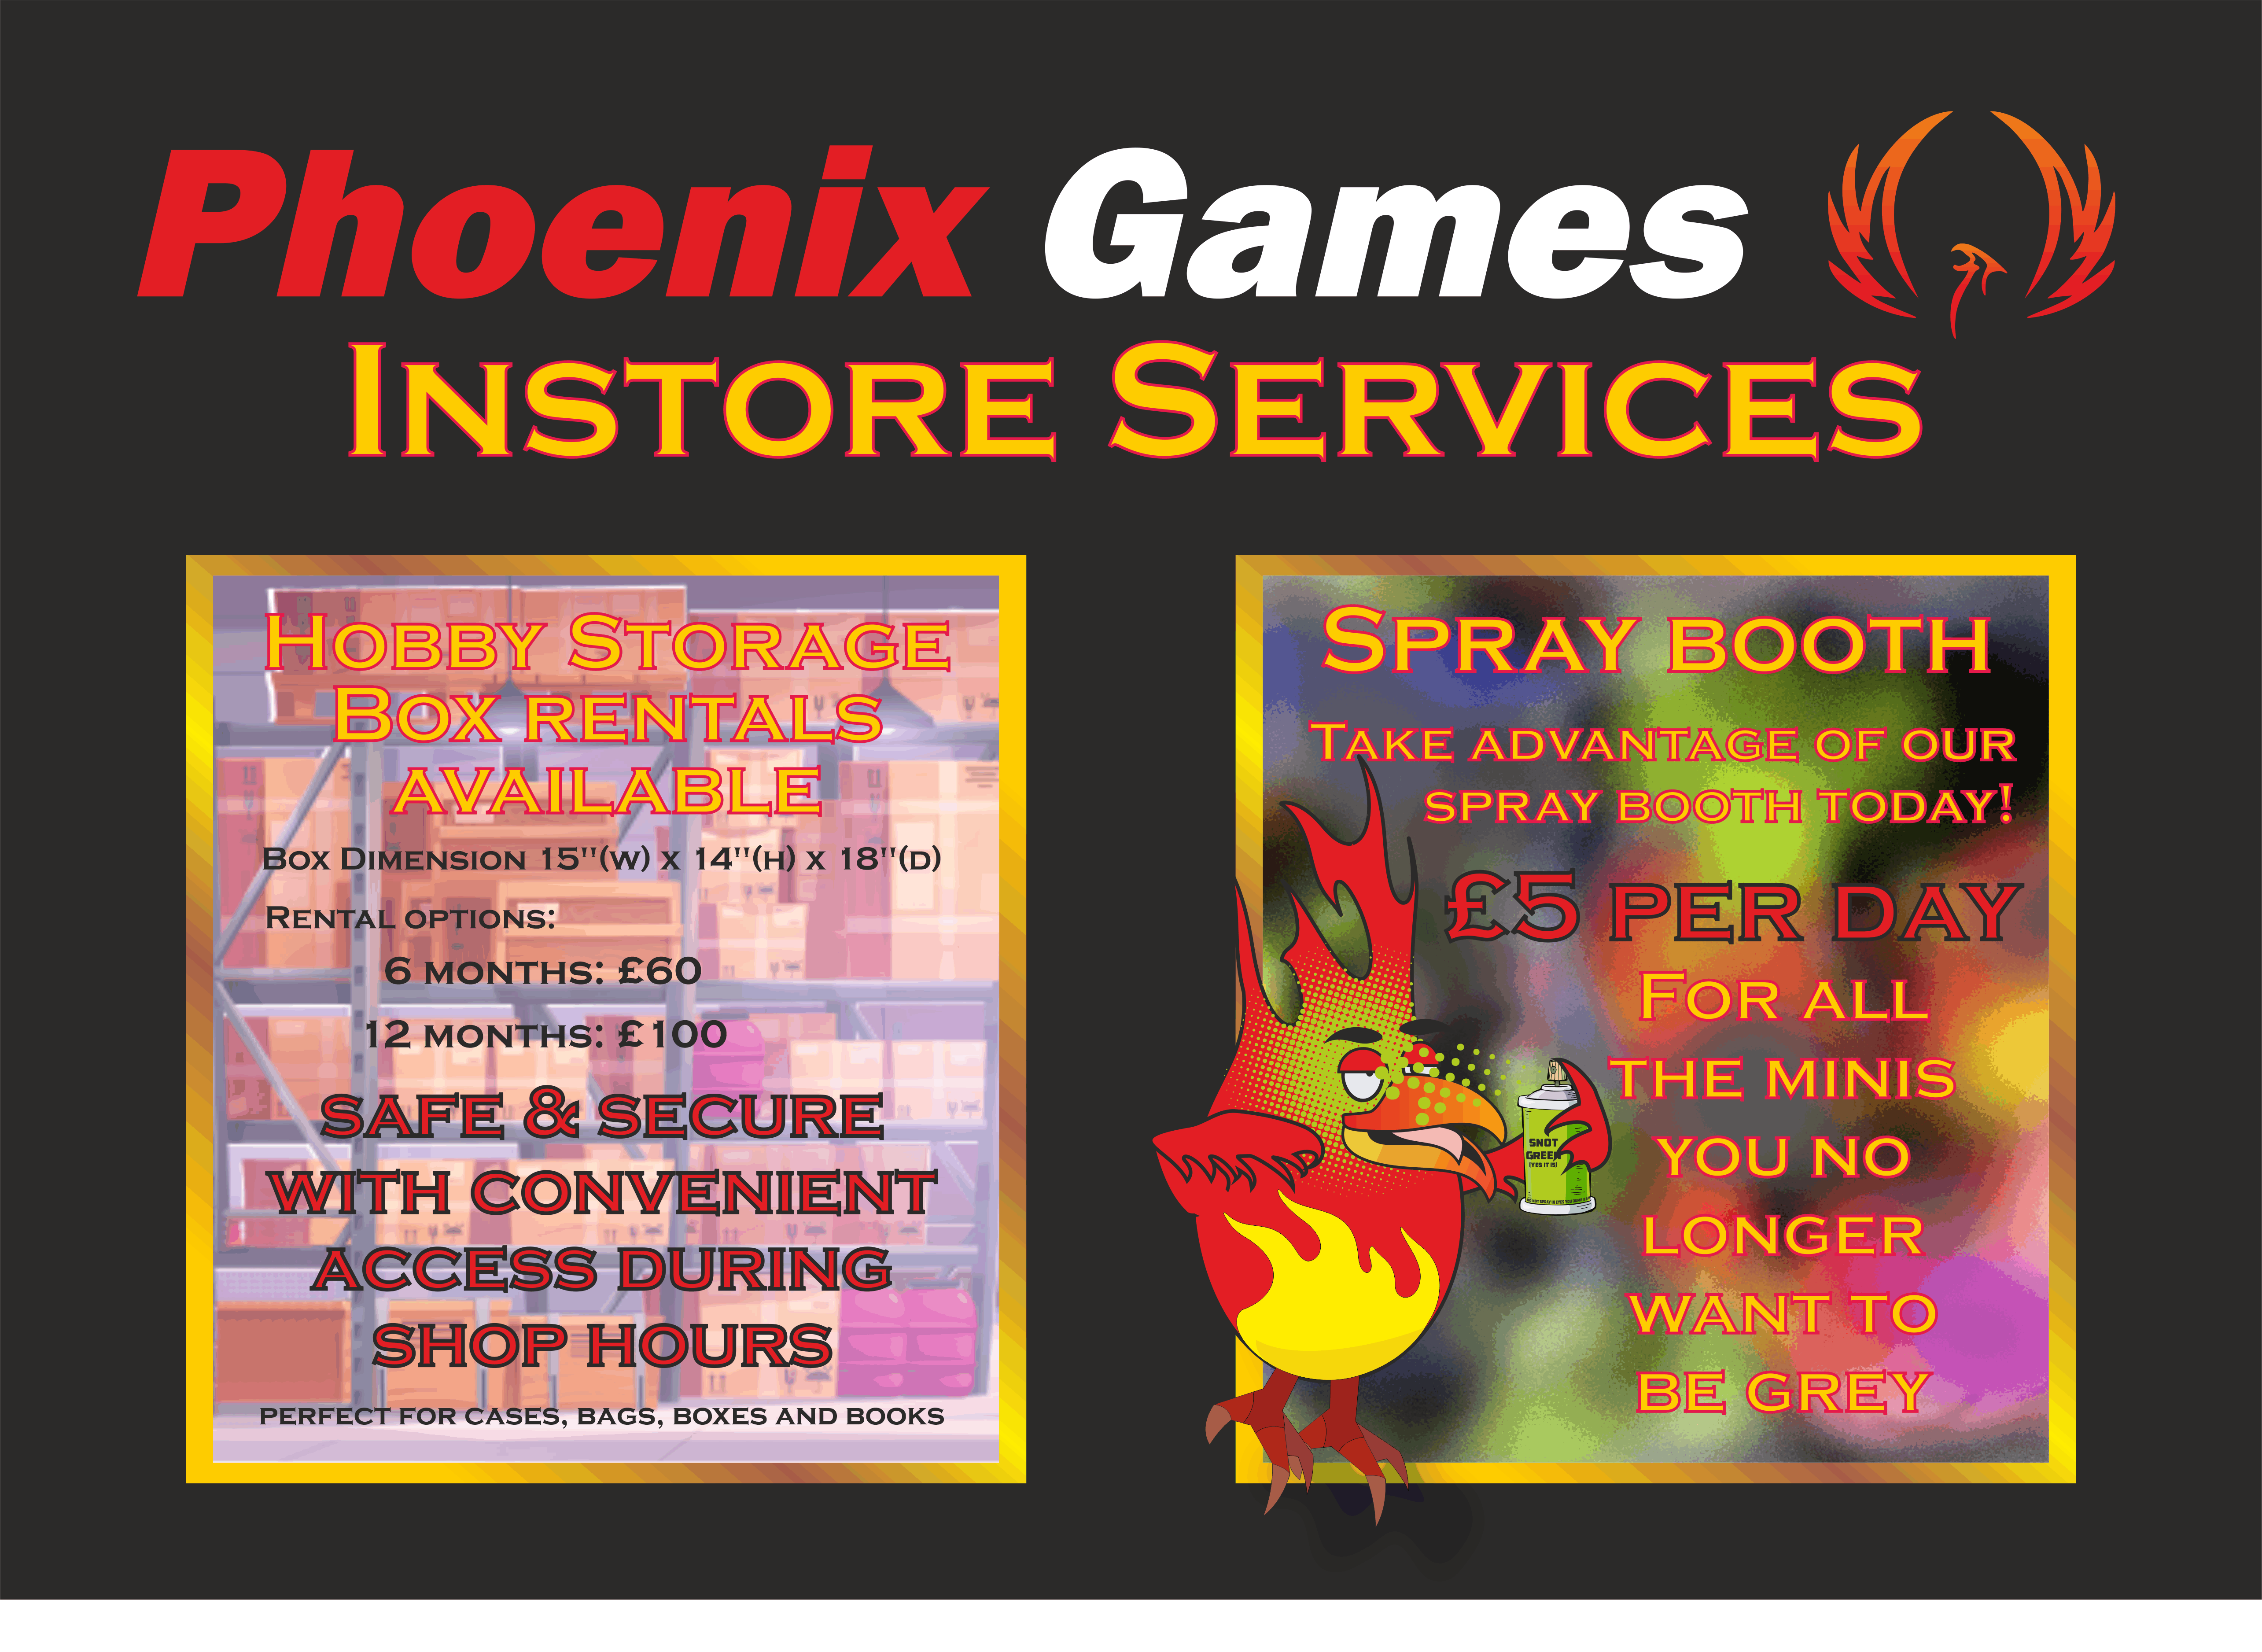 Phoenix Games in-store services.